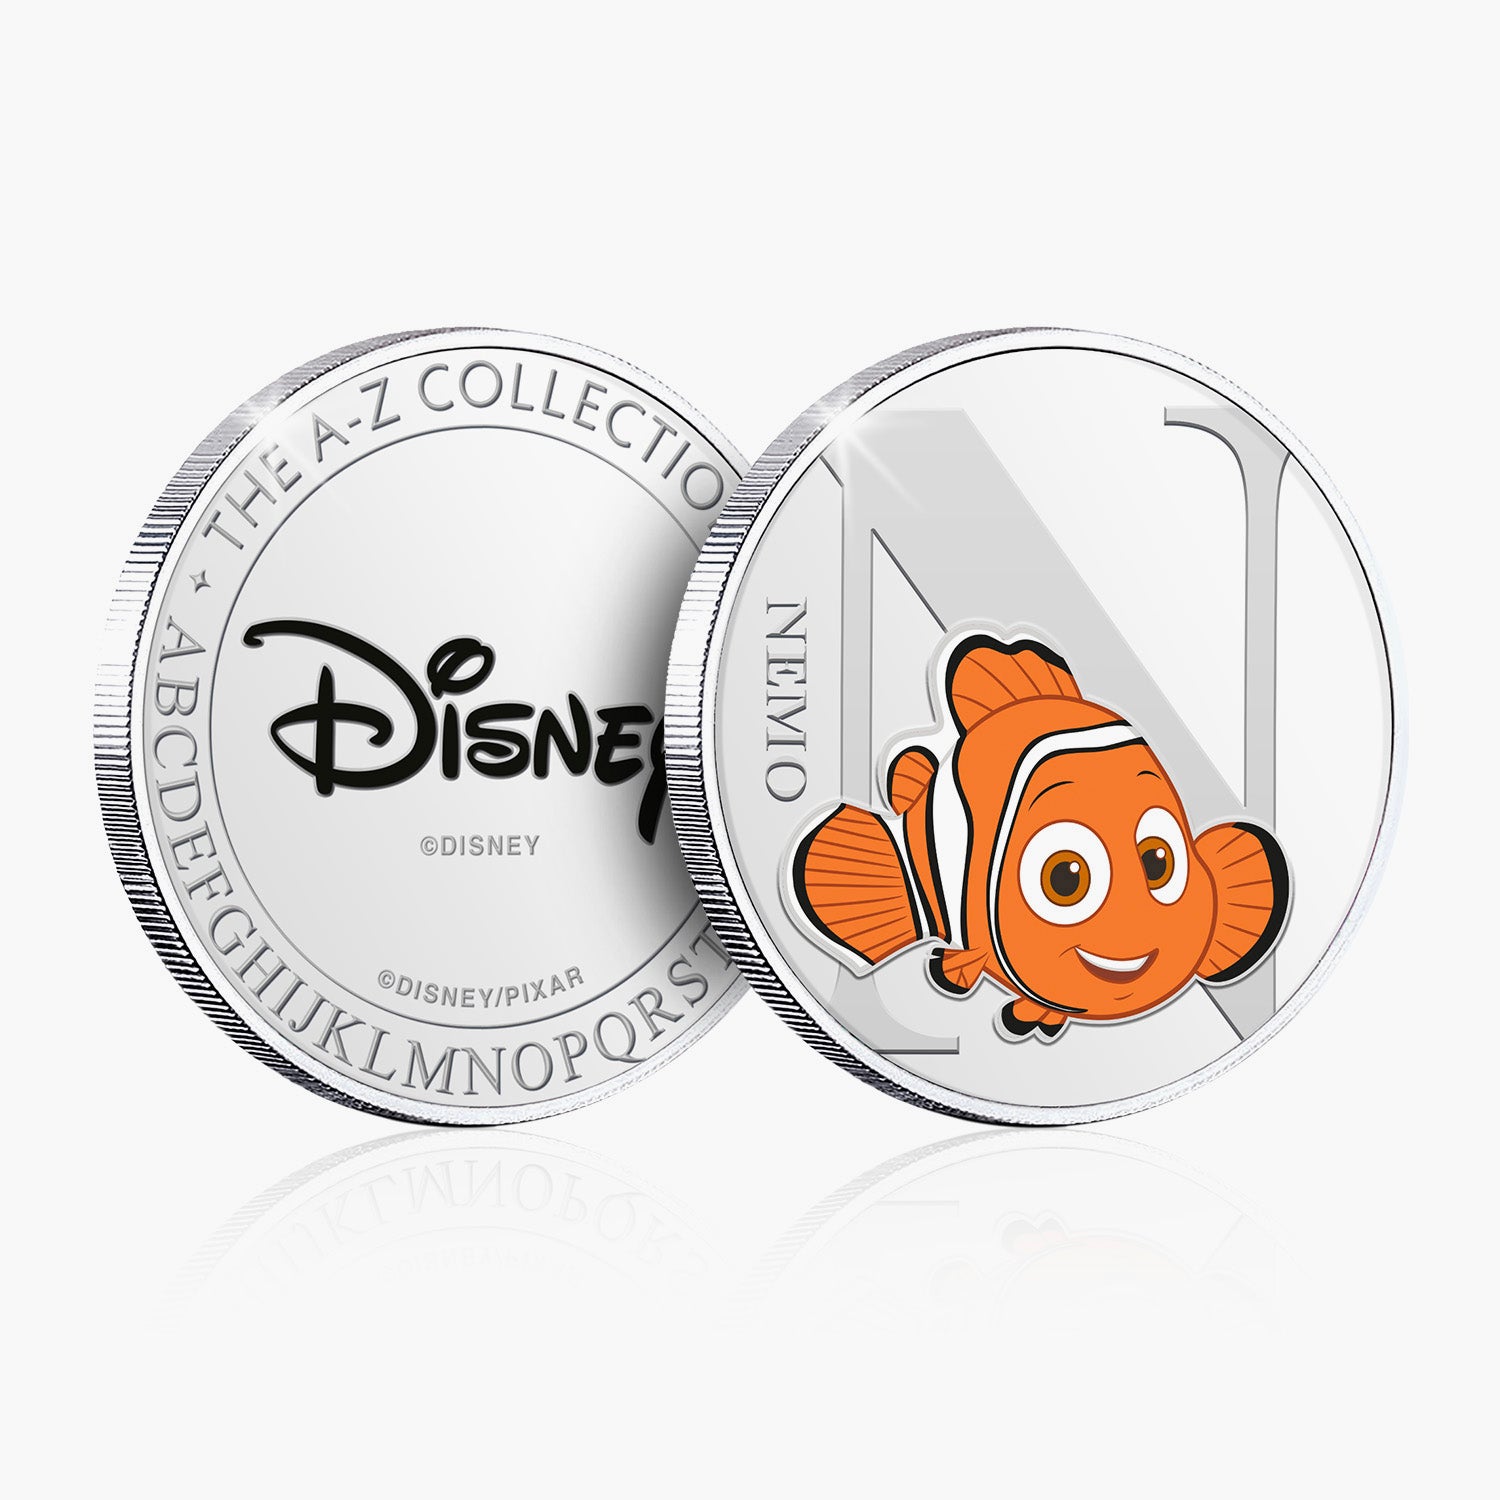 N is for Nemo Silver-Plated Full Colour Commemorative